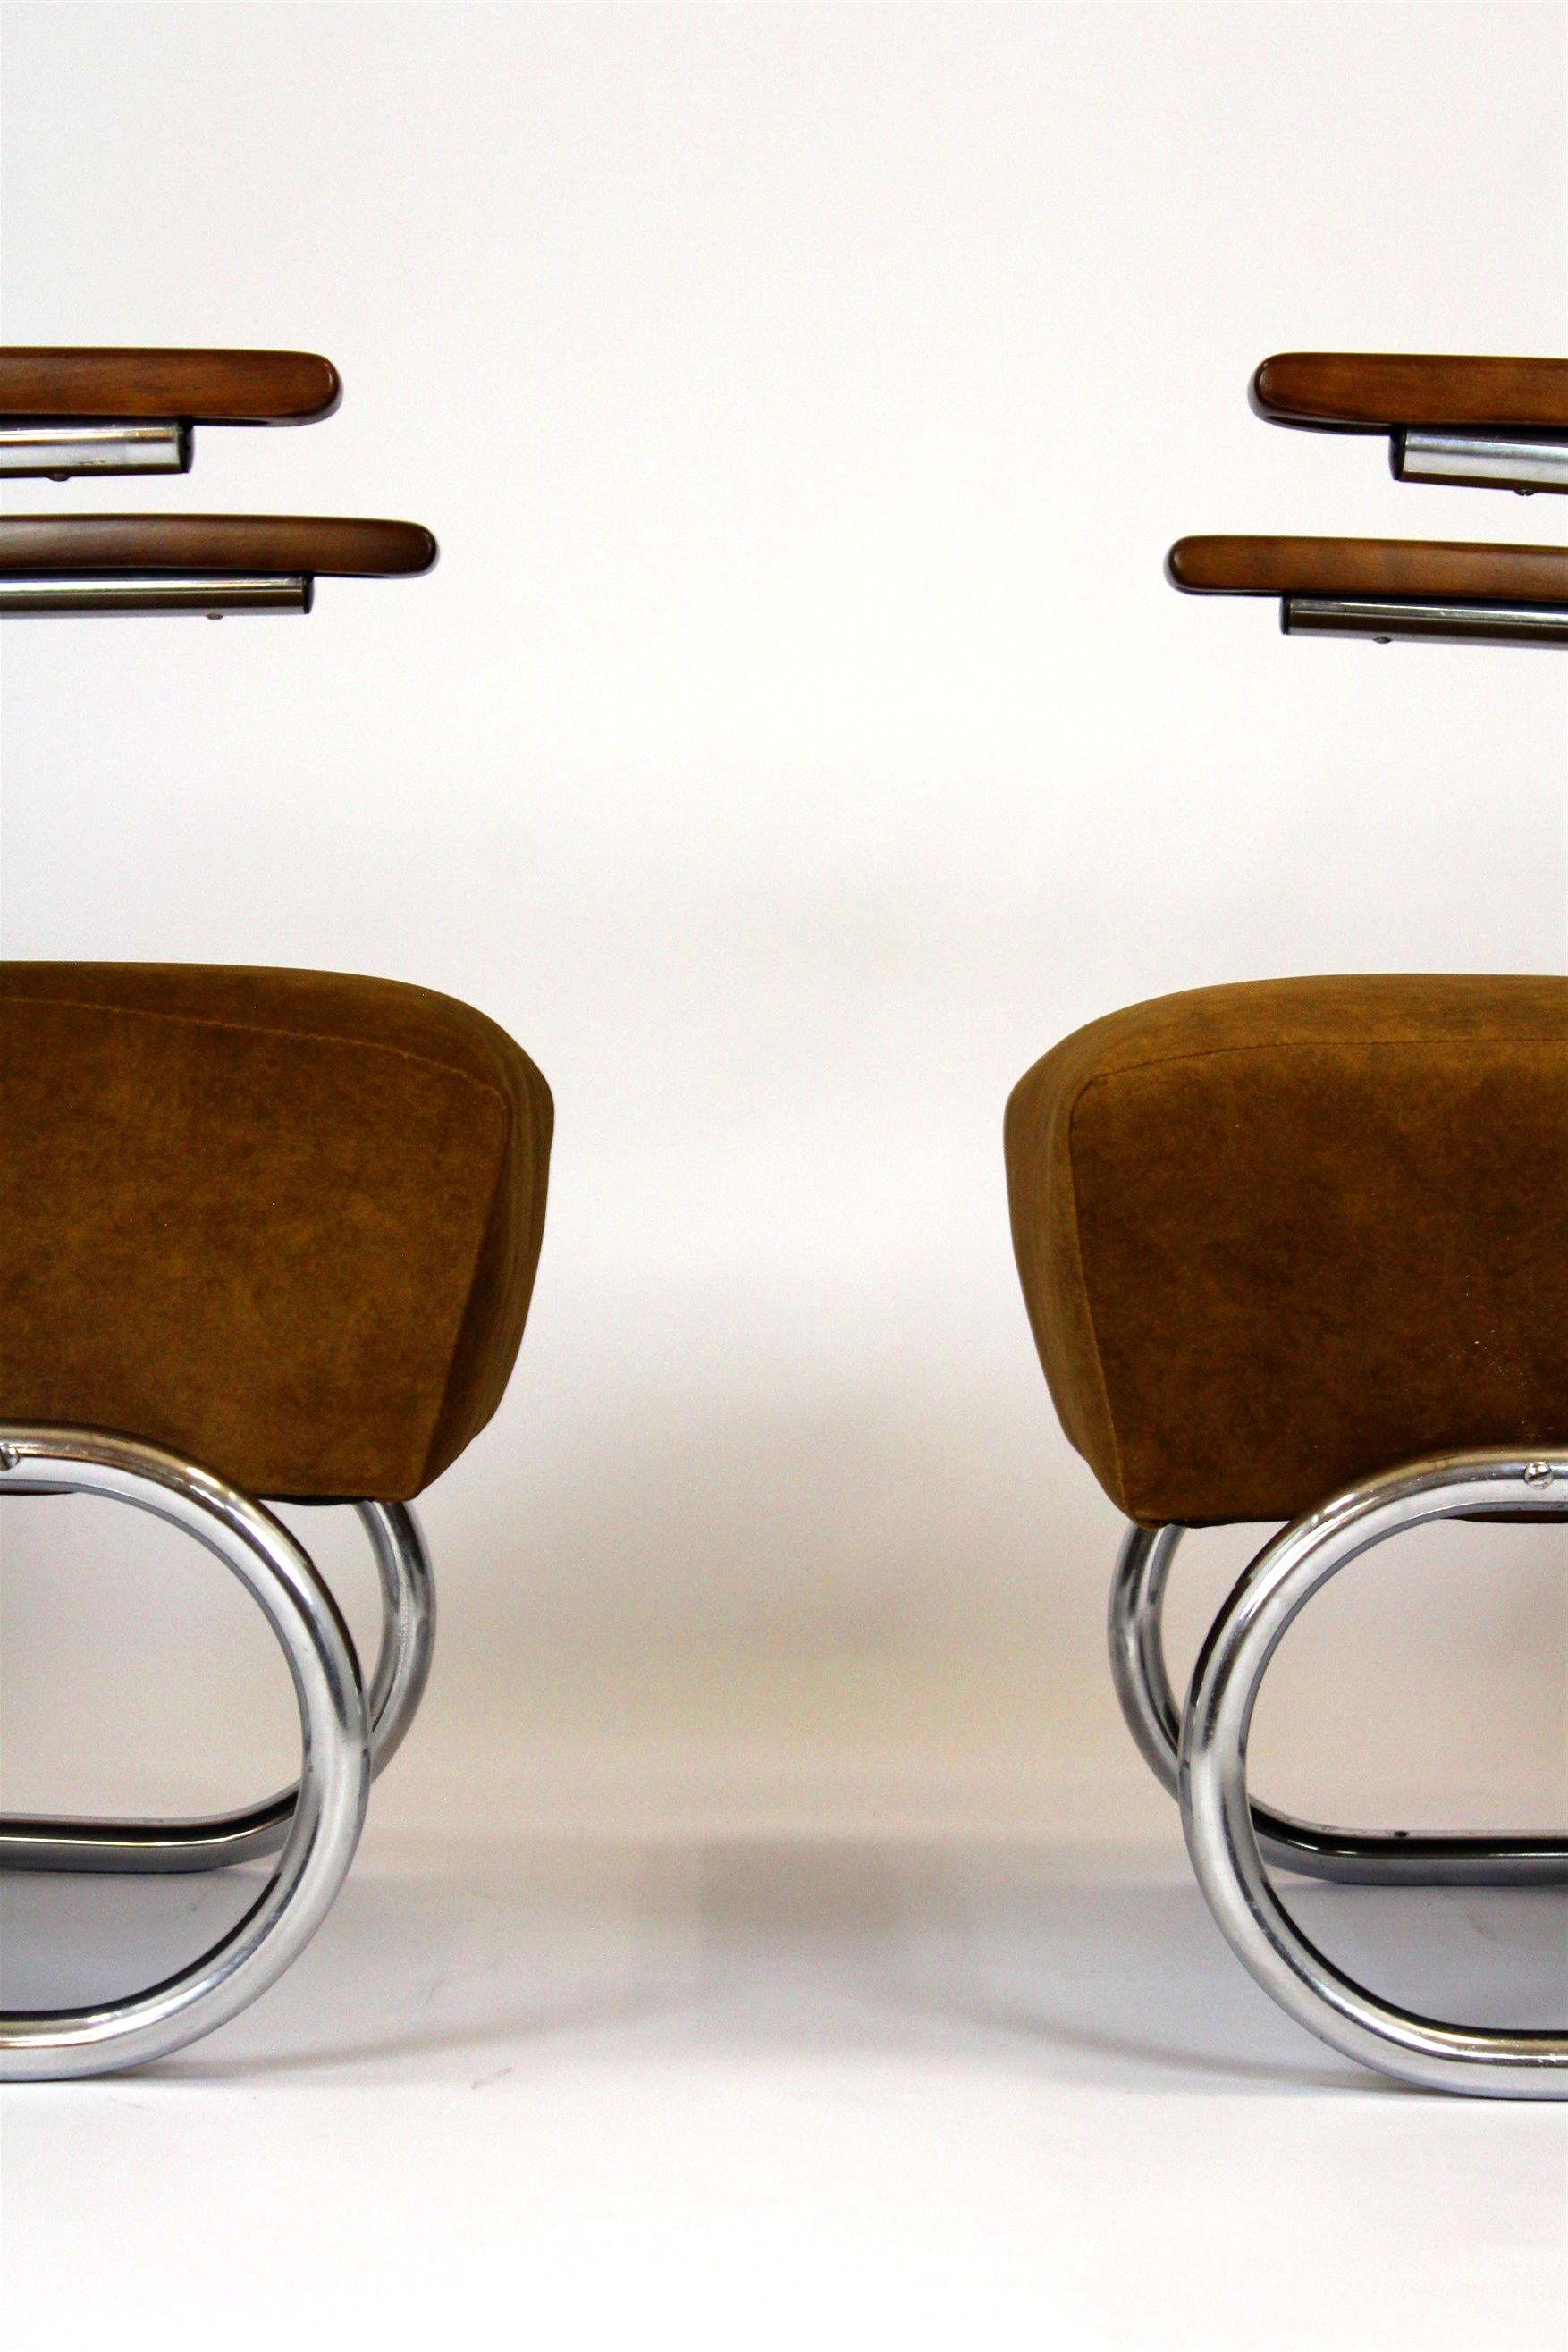 Restored Bauhaus S411 Armchairs by W. H. Gispen for Mücke Melder 1940s, Set of 2 For Sale 14